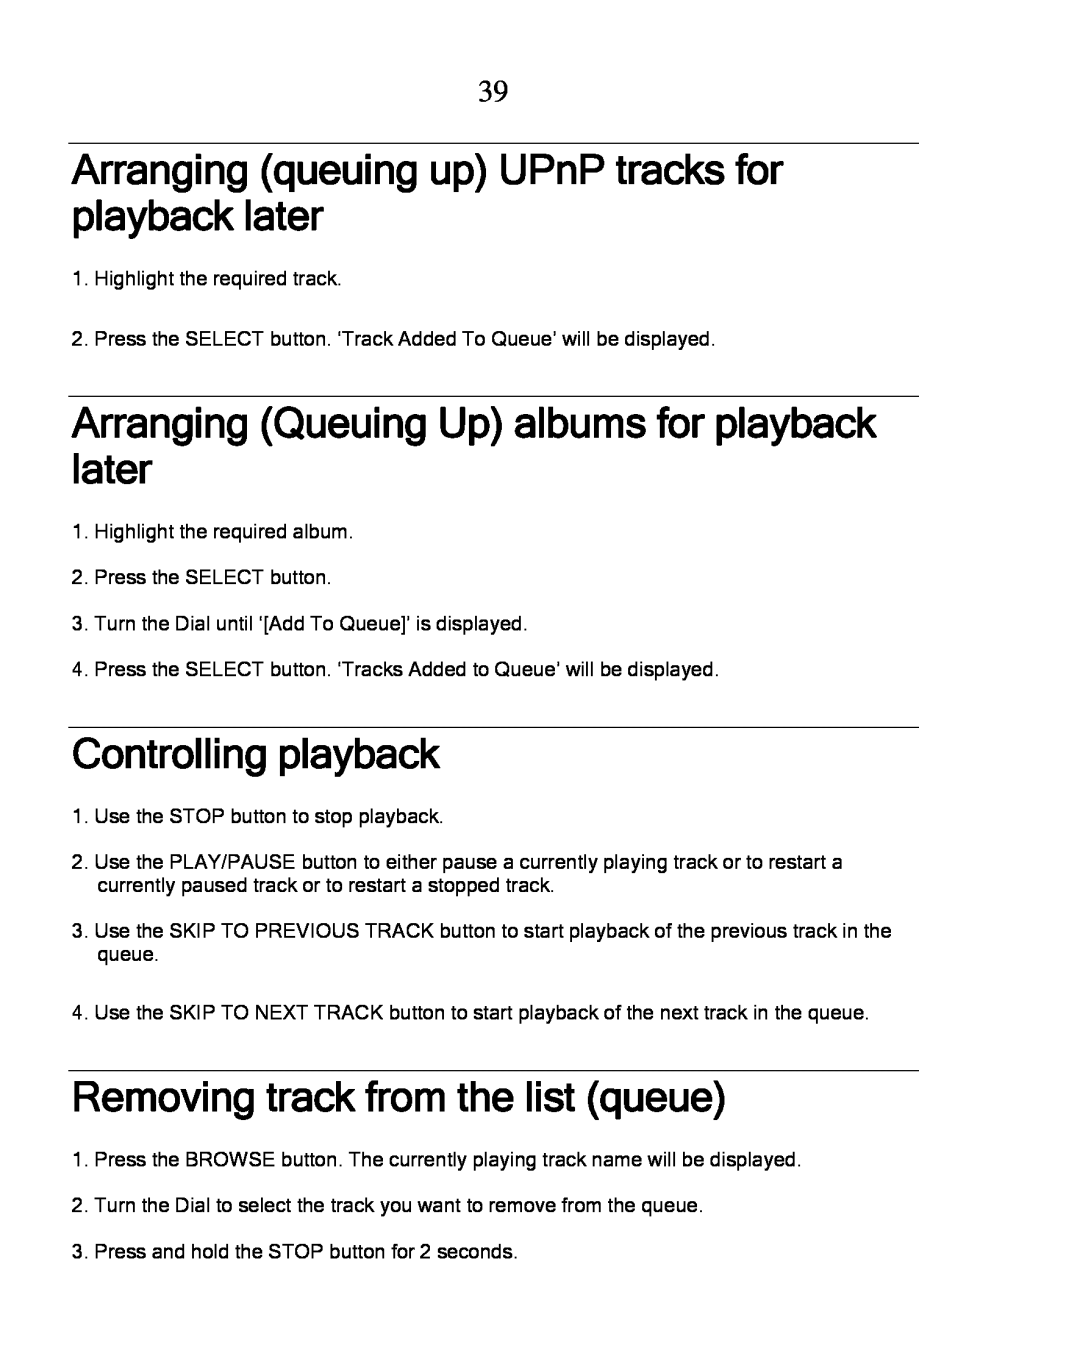 Grace GDI-IRDT200 Removing track from the list queue, Arranging Queuing Up albums for playback later, Controlling playback 